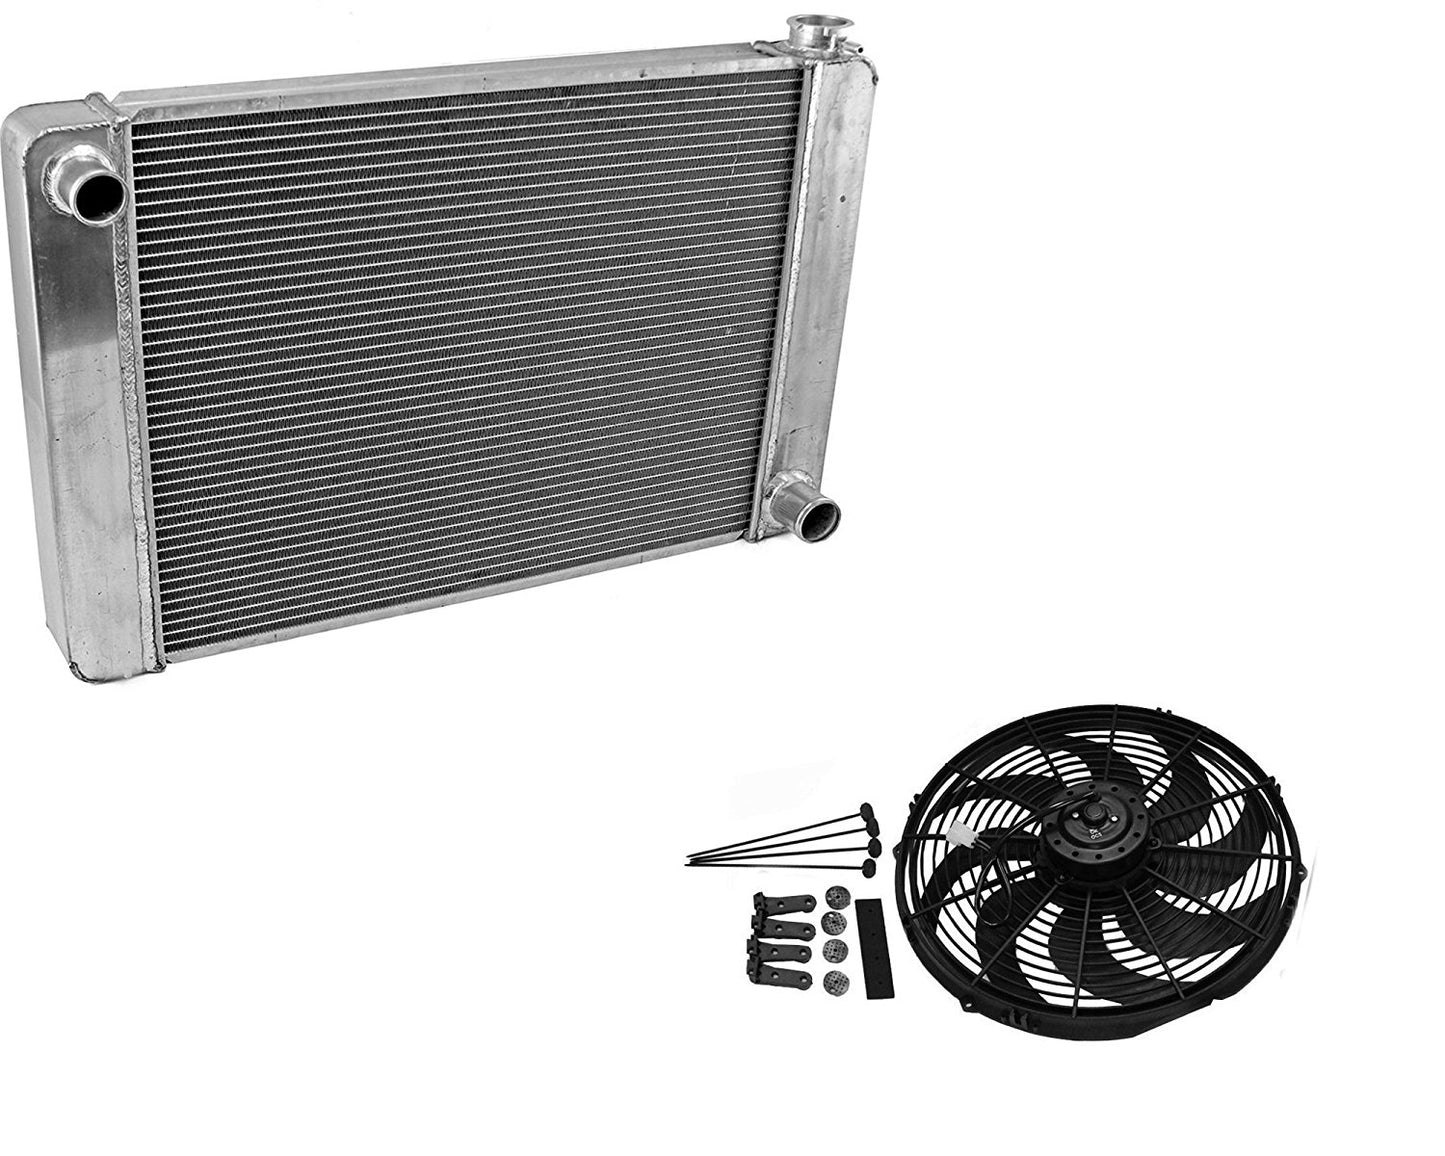 Fabricated Aluminum Radiator 30" x 19" x3" Overall For SBC BBC Chevy GM & 14" Heavy Duty Radiator Electric Wide Curved Blade FAN